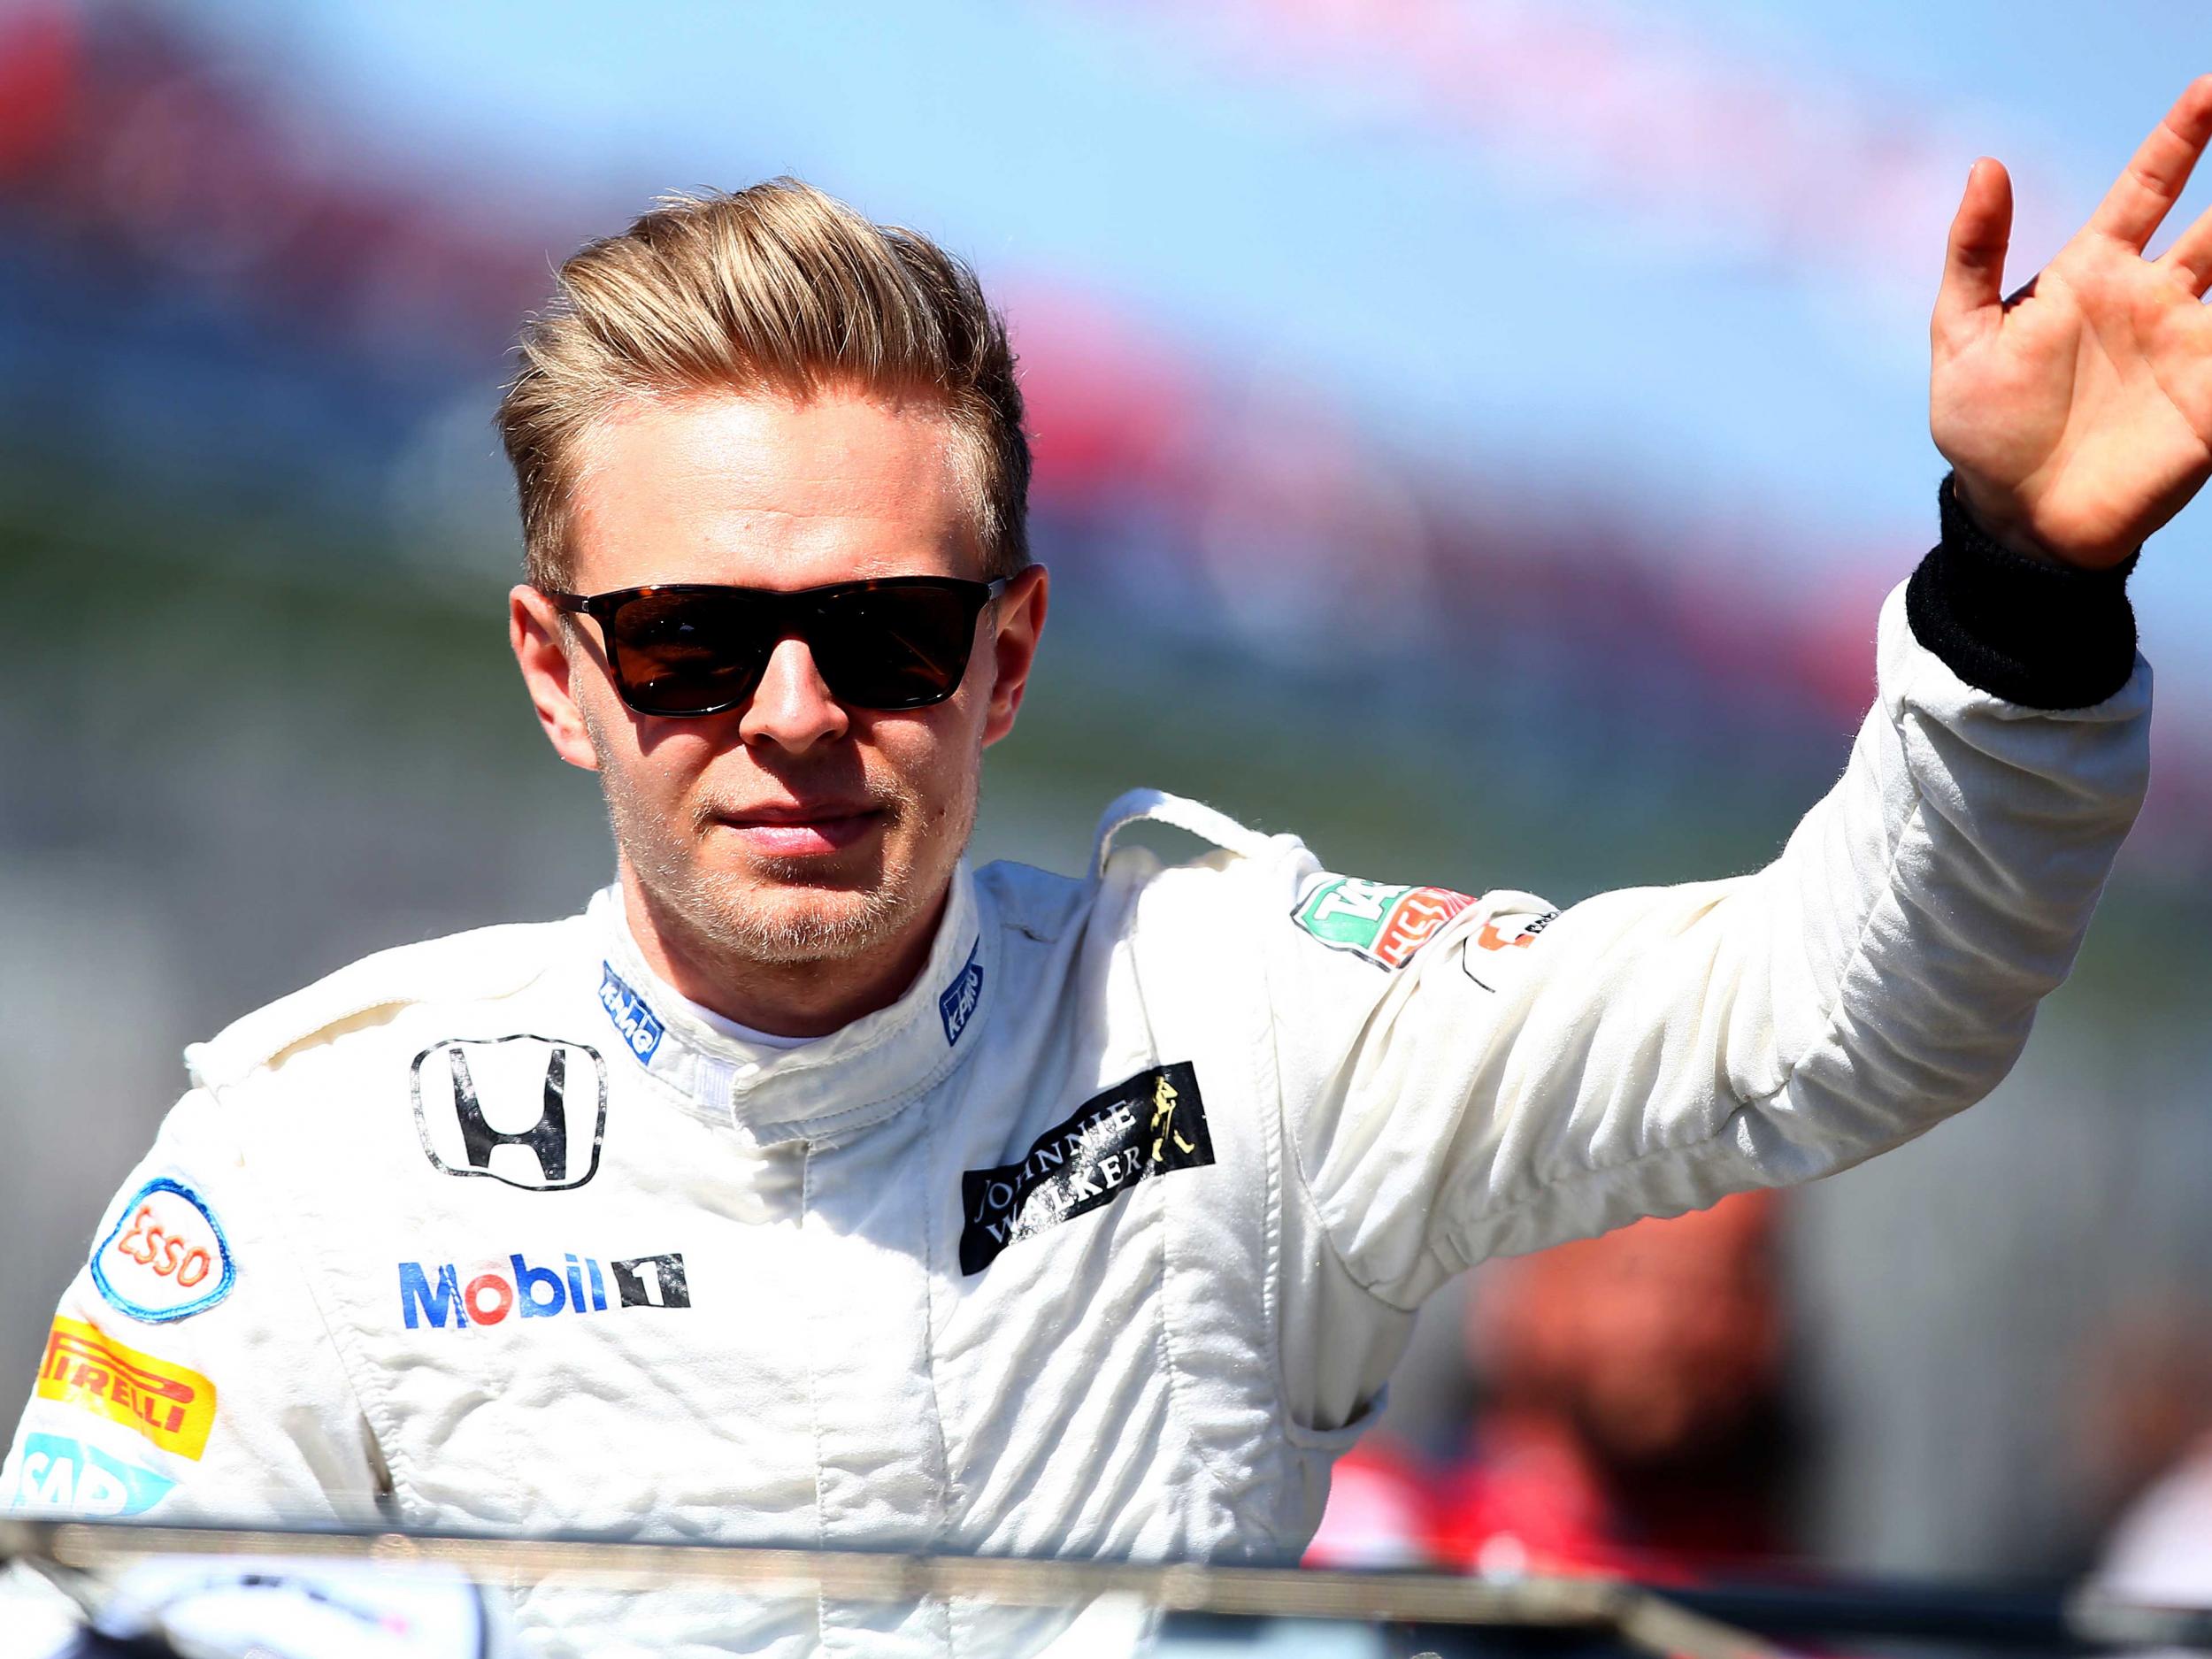 Kevin Magnussen says he is already in talks with other F1 teams about securing a drive for next season